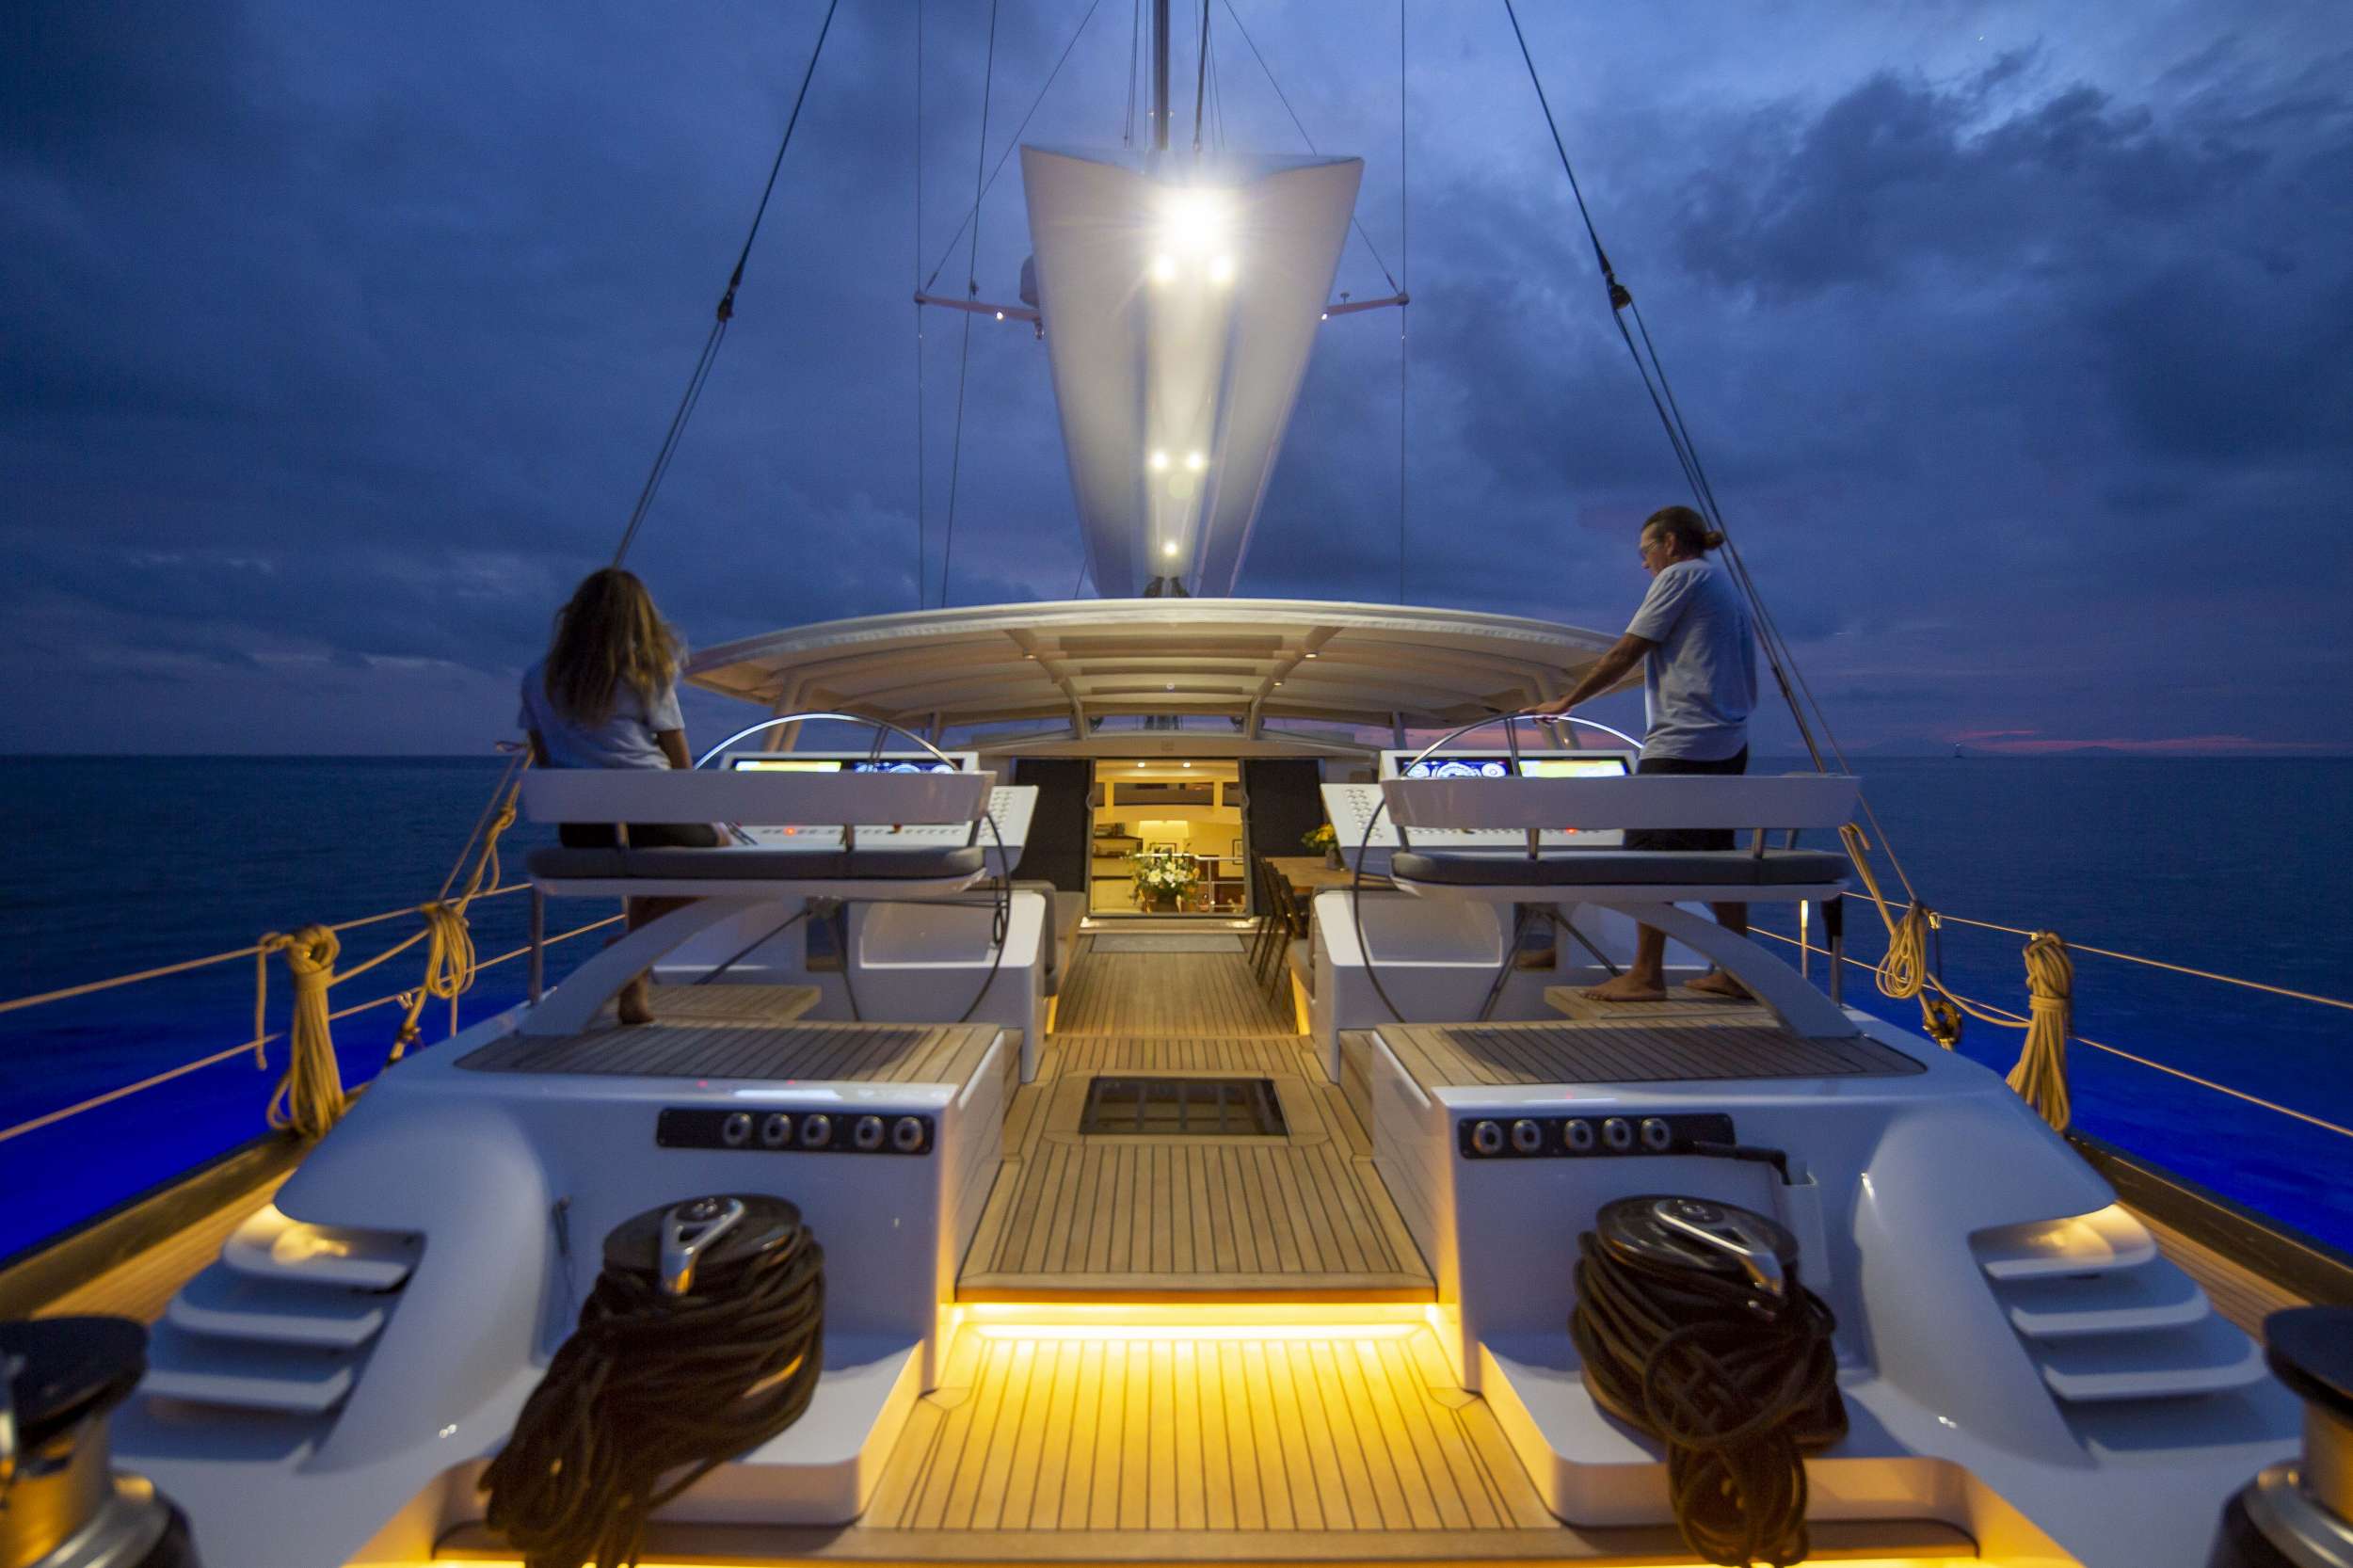 RADIANCE Yacht Charter - Dual helm stations offer comfortable seating and excellent visibility.  Her efficient arrangement offers easy maneuverability with minimal crew.